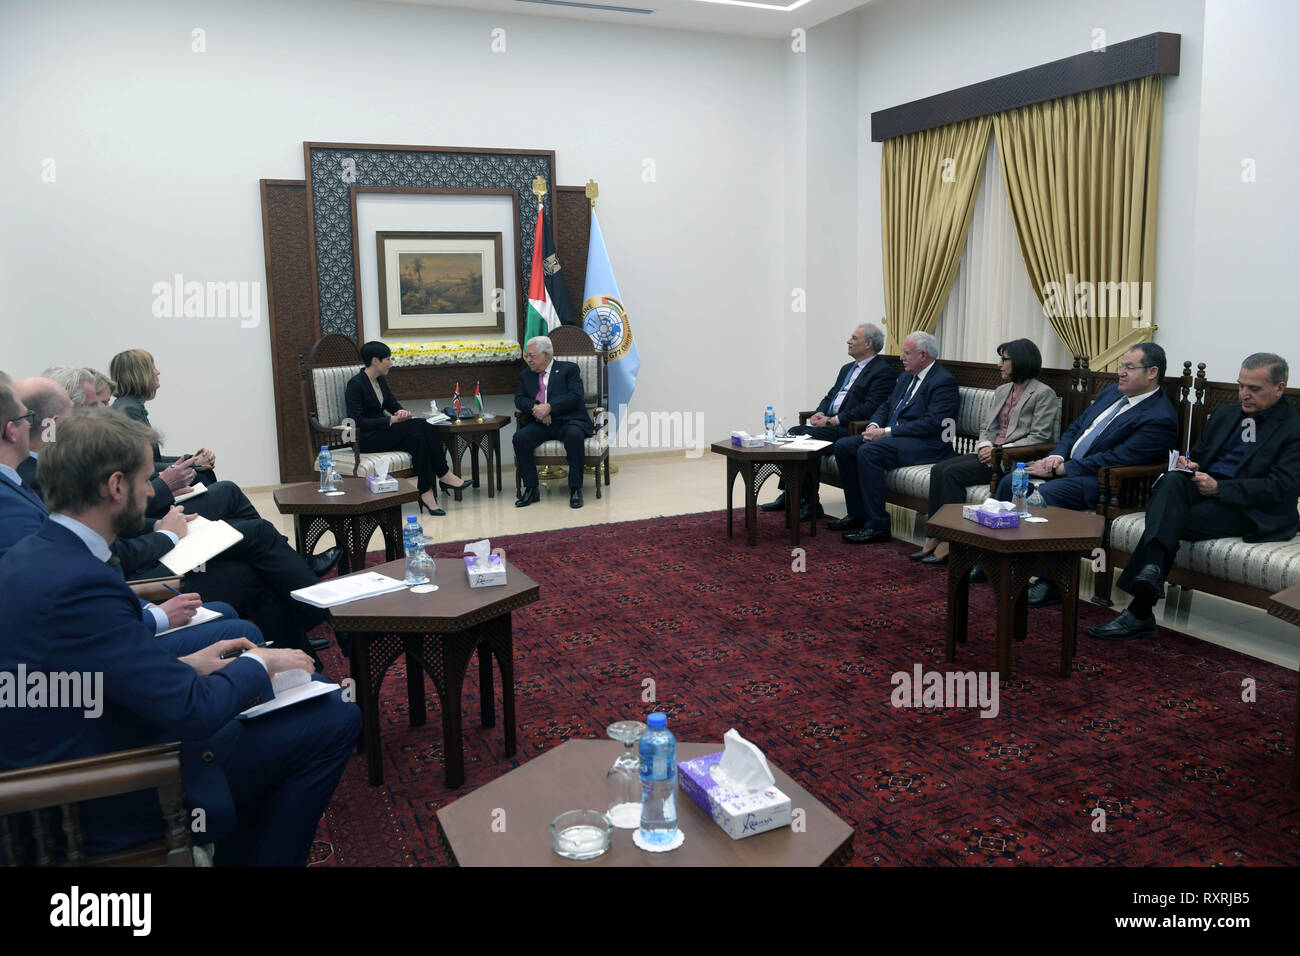 Ramallah, West Bank, Palestinian Territory. 9th Mar, 2019. Palestinian President Mahmoud Abbas meets with Norwegian Foreign Minister Ine Marie Eriksen Soreide, at Abbas's headquarter in the West Bank city of Ramallah on March 10, 2019 Credit: Thaer Ganaim/APA Images/ZUMA Wire/Alamy Live News Stock Photo